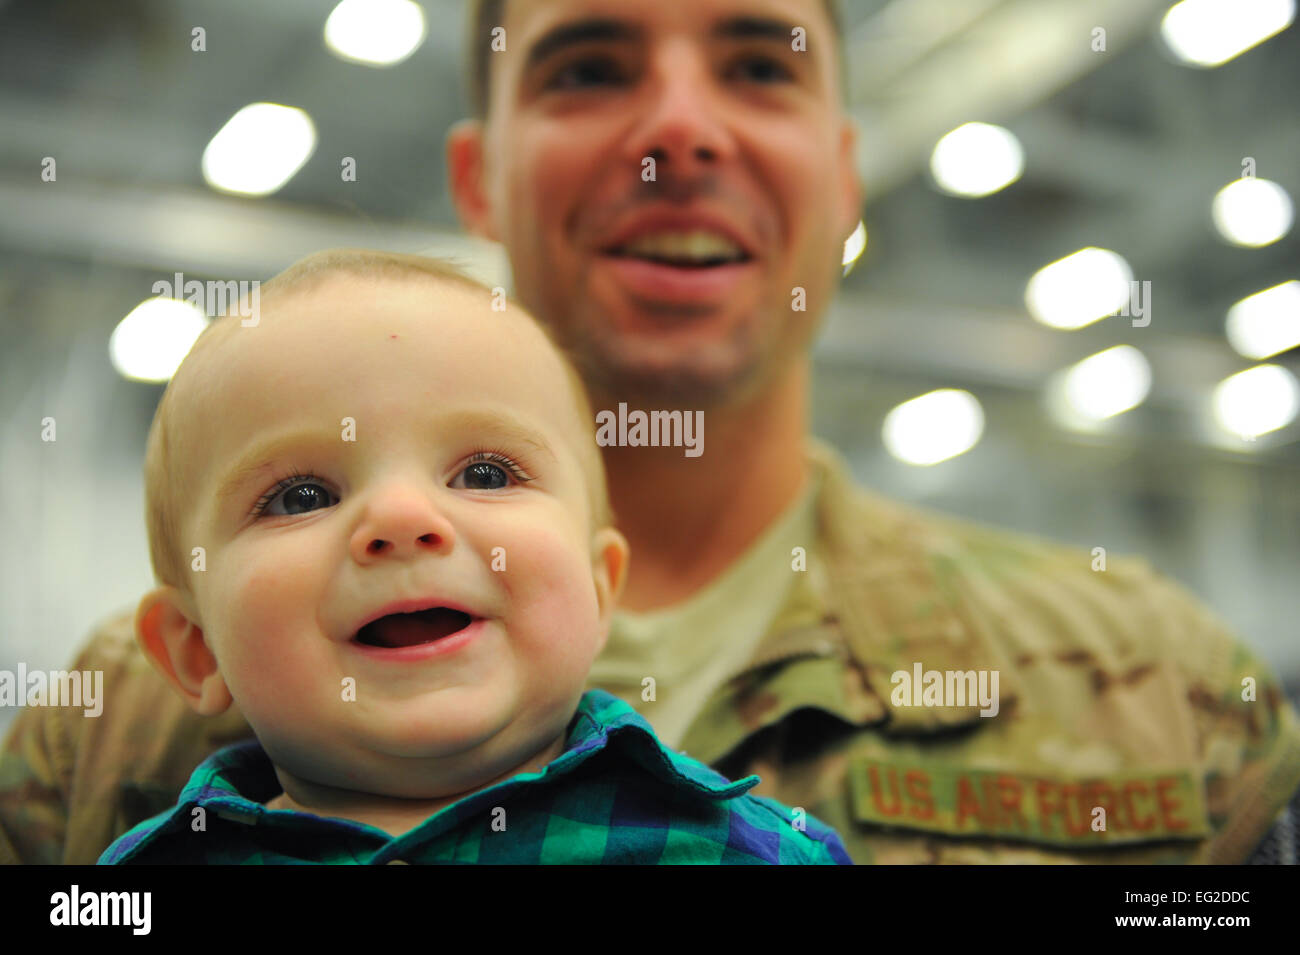 Aiden Robillard smiles in the arms of his father, Staff Sgt. <b>Tim Robillard</b>, ... - aiden-robillard-smiles-in-the-arms-of-his-father-staff-sgt-tim-robillard-EG2DDC